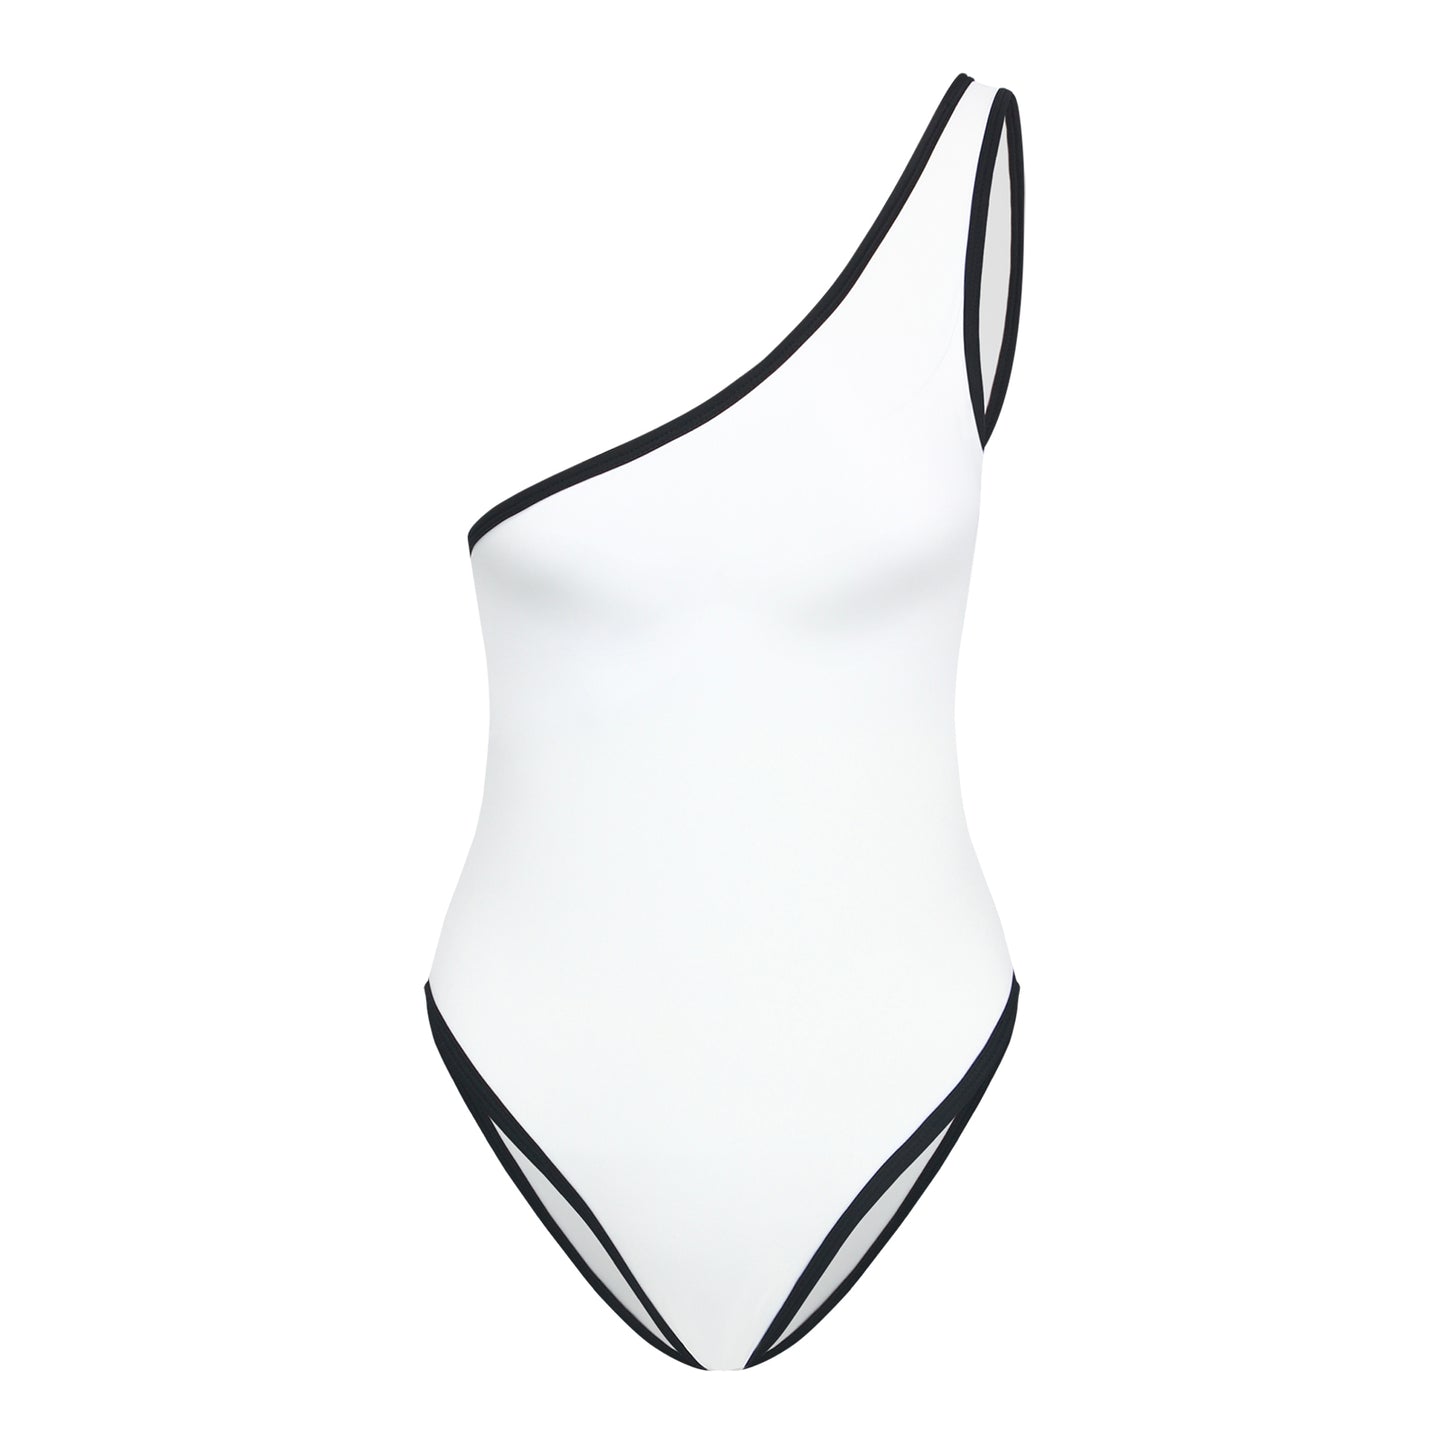 The Siren is a flattering one-shoulder swimsuit with a high thigh cut and built-in padding. Made with sustainable fabric